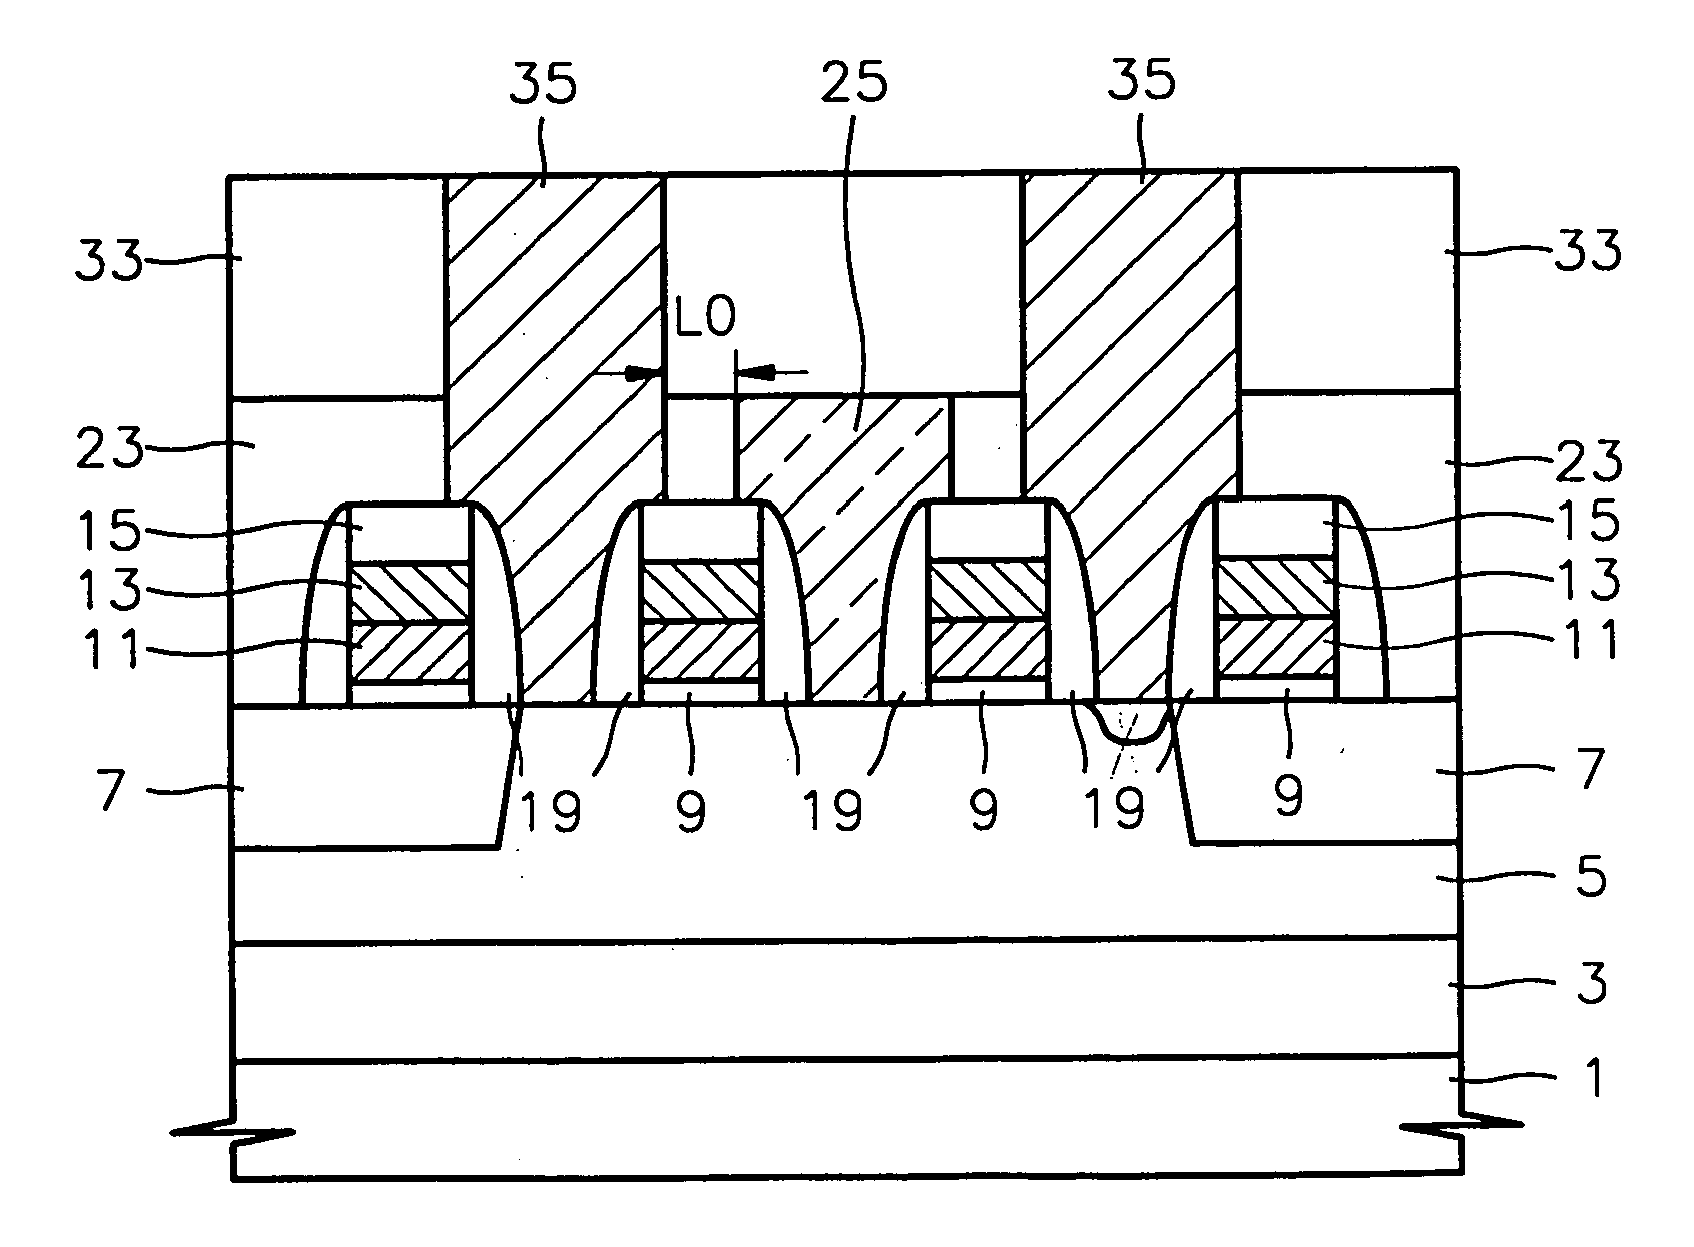 Semiconductor memory device having self-aligned contacts and method of fabricating the same